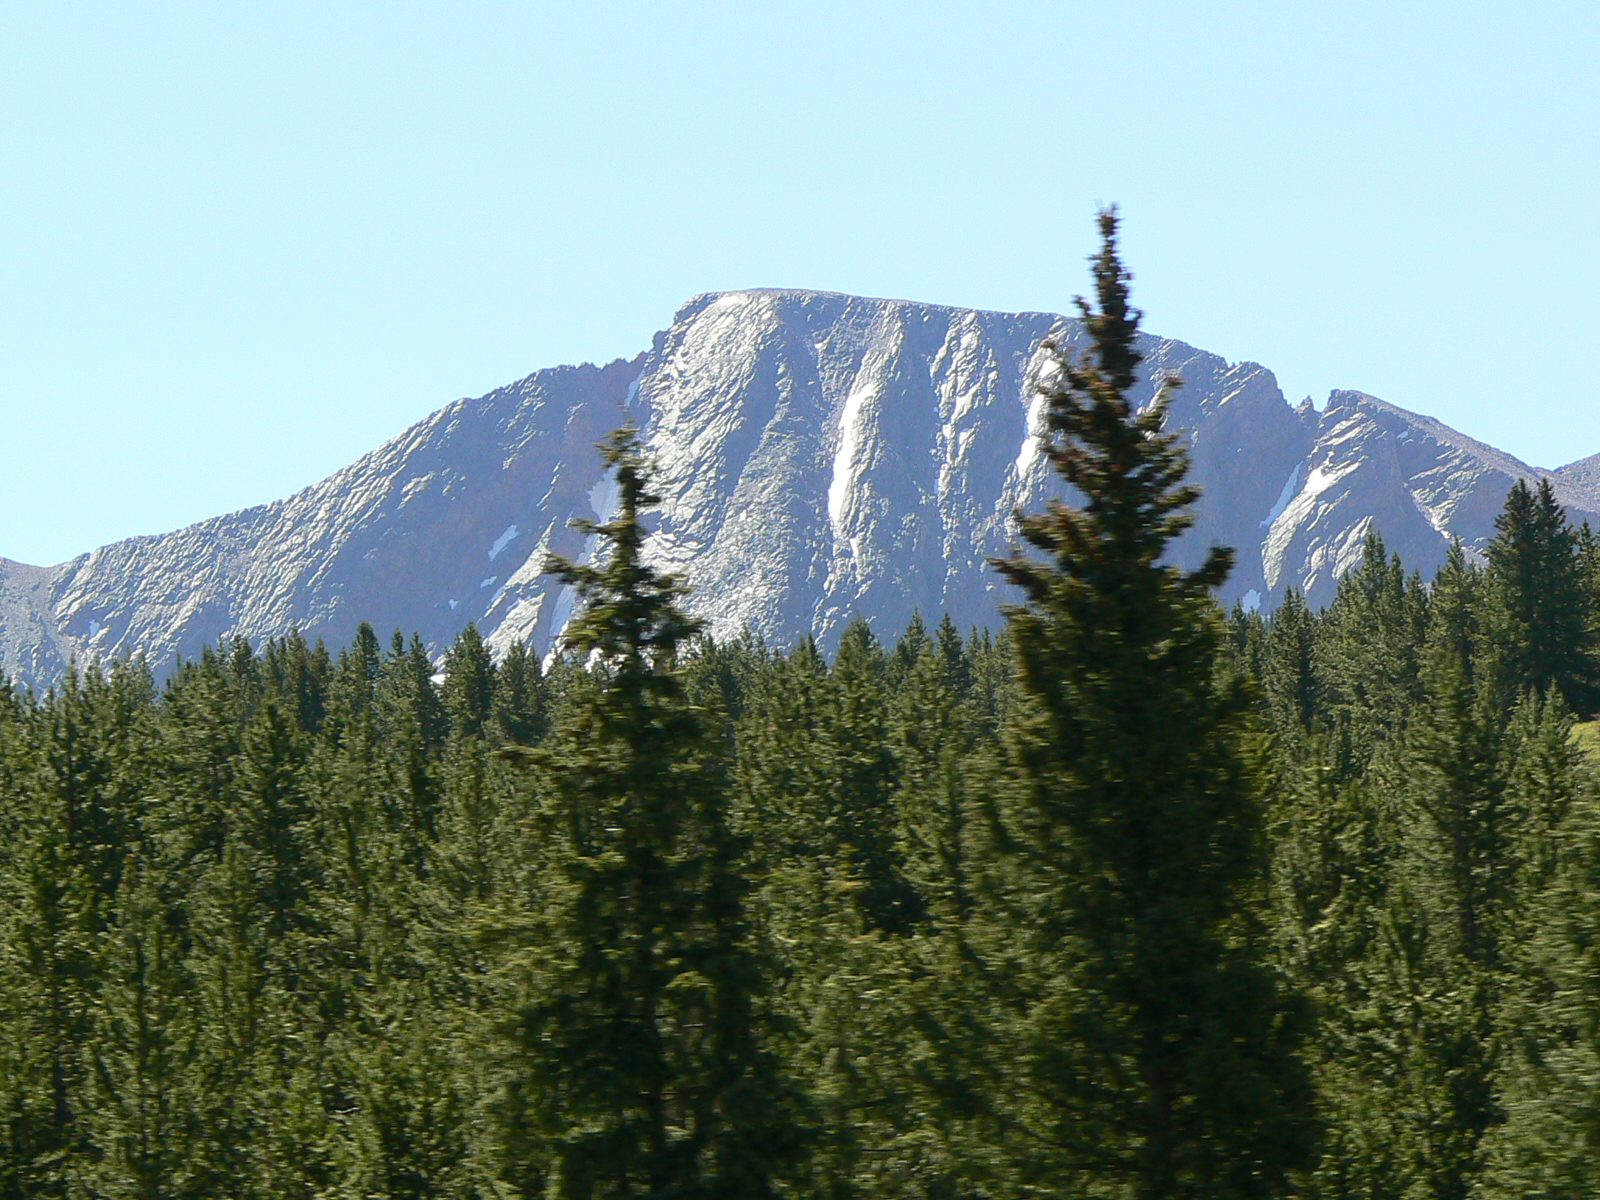 a po of a mountain range from behind some trees